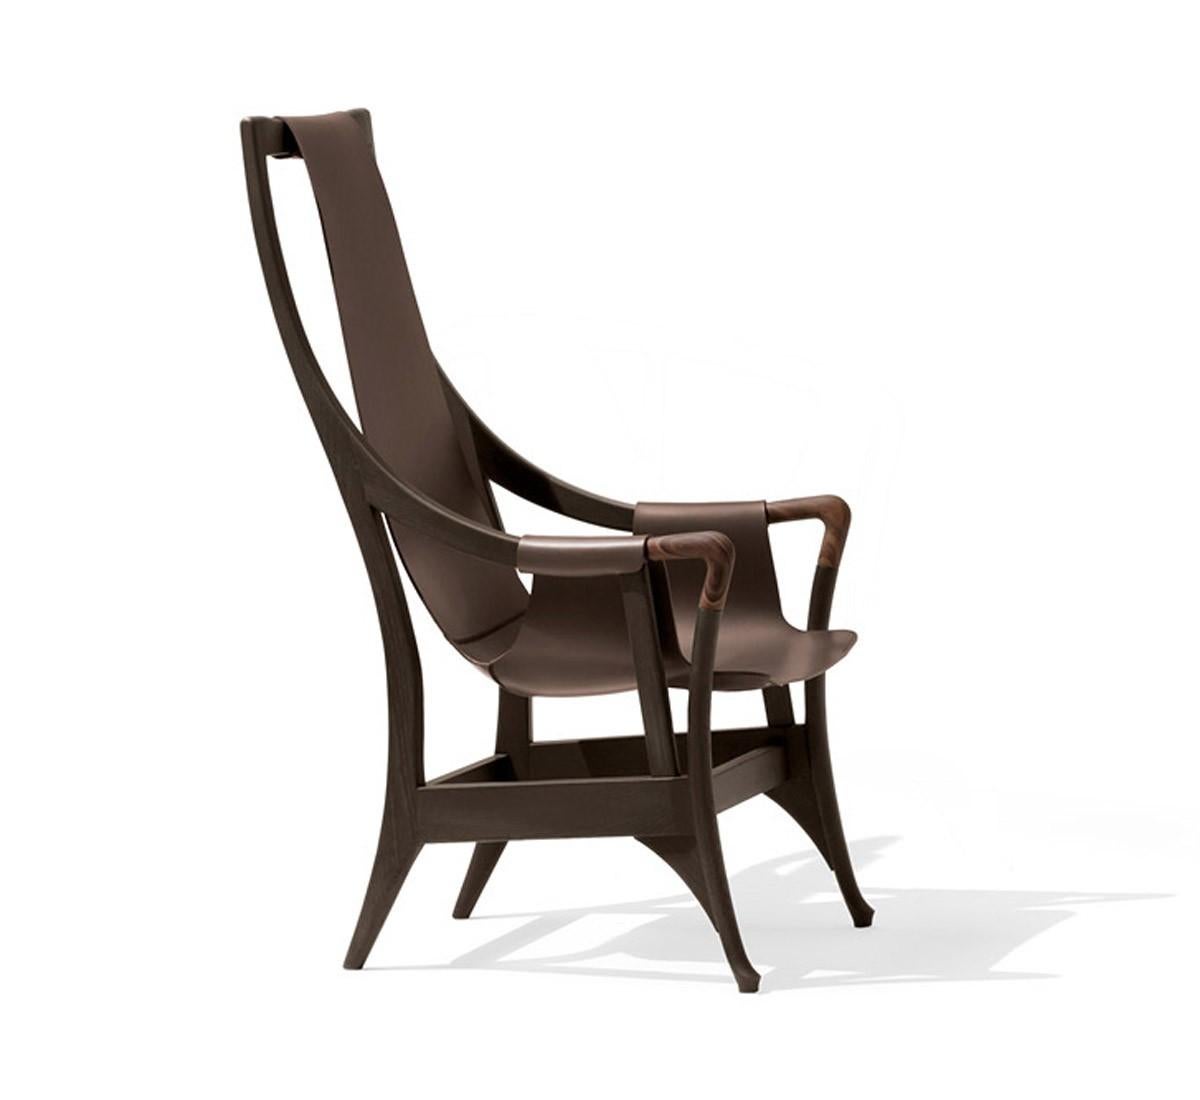 Designed in 1987, the Progetti collection was inspired by the fine detailing on an elegant handle of an antique walking stick.

Progetti 30240 armchair with the frame in solid beech wood and armrests in polished pau ferro wood. The seat and back